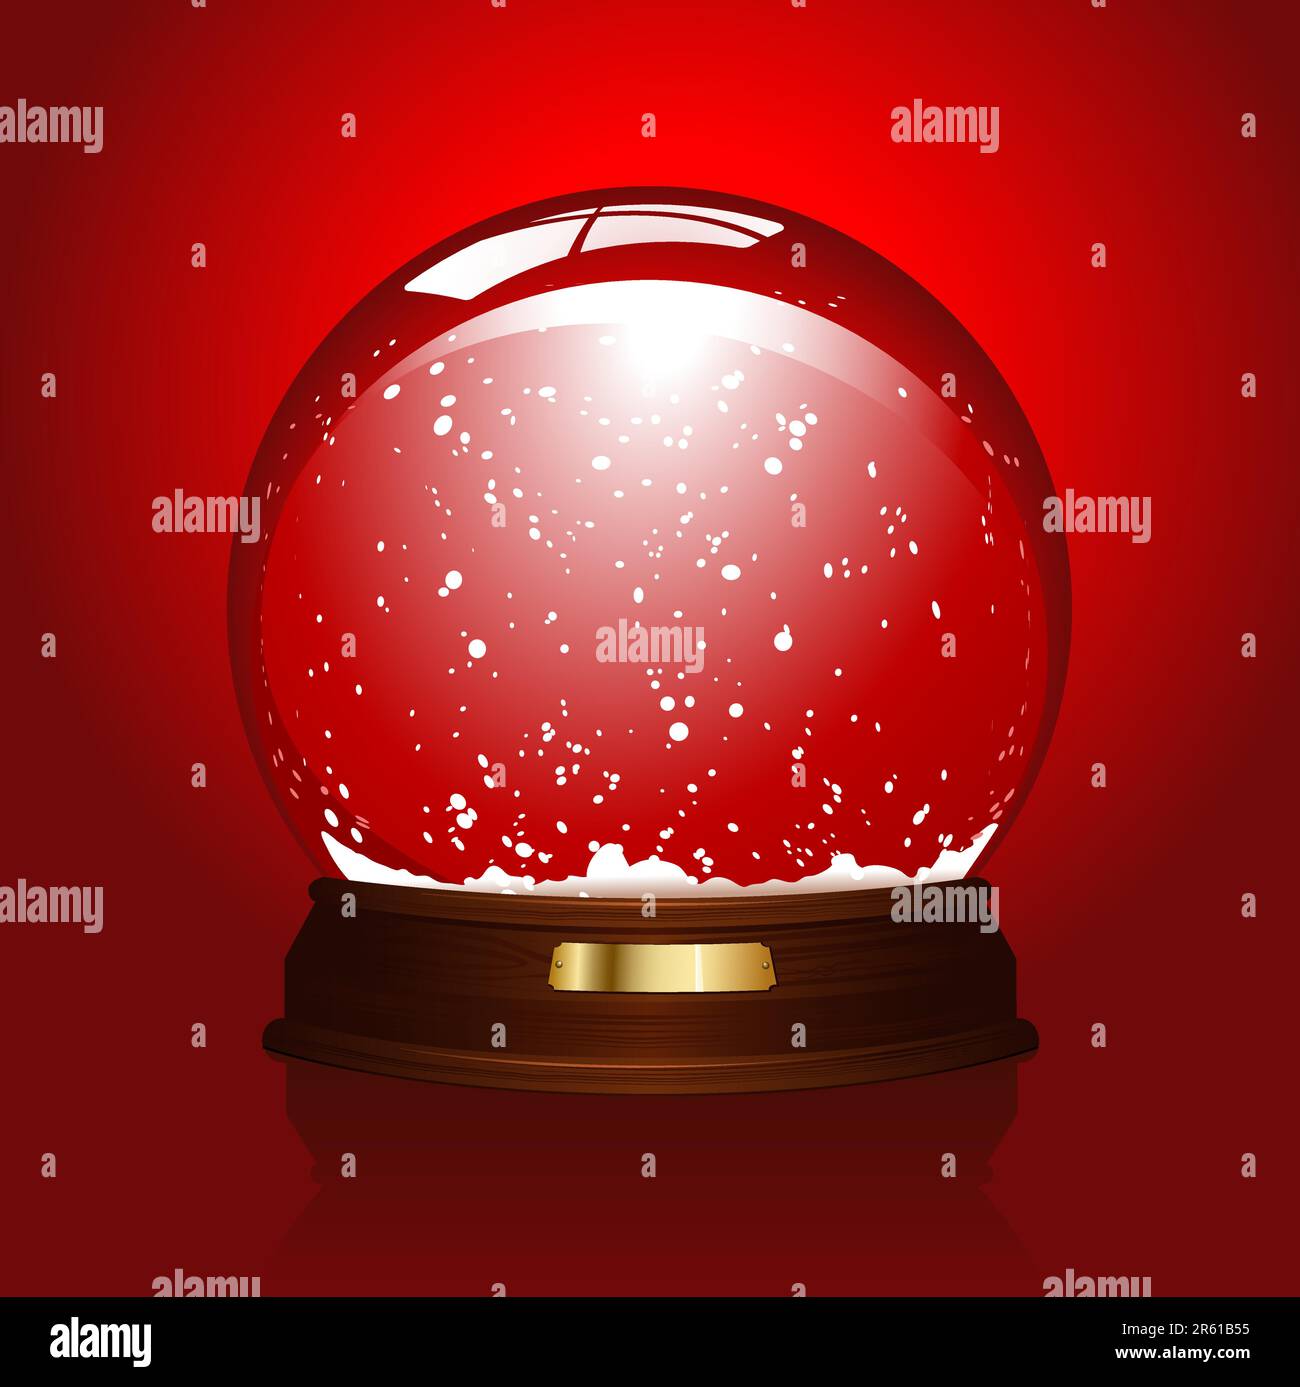 realistic illustration of an empty snowglobe over a red background - customize by inserting an object, logo or text Stock Vector